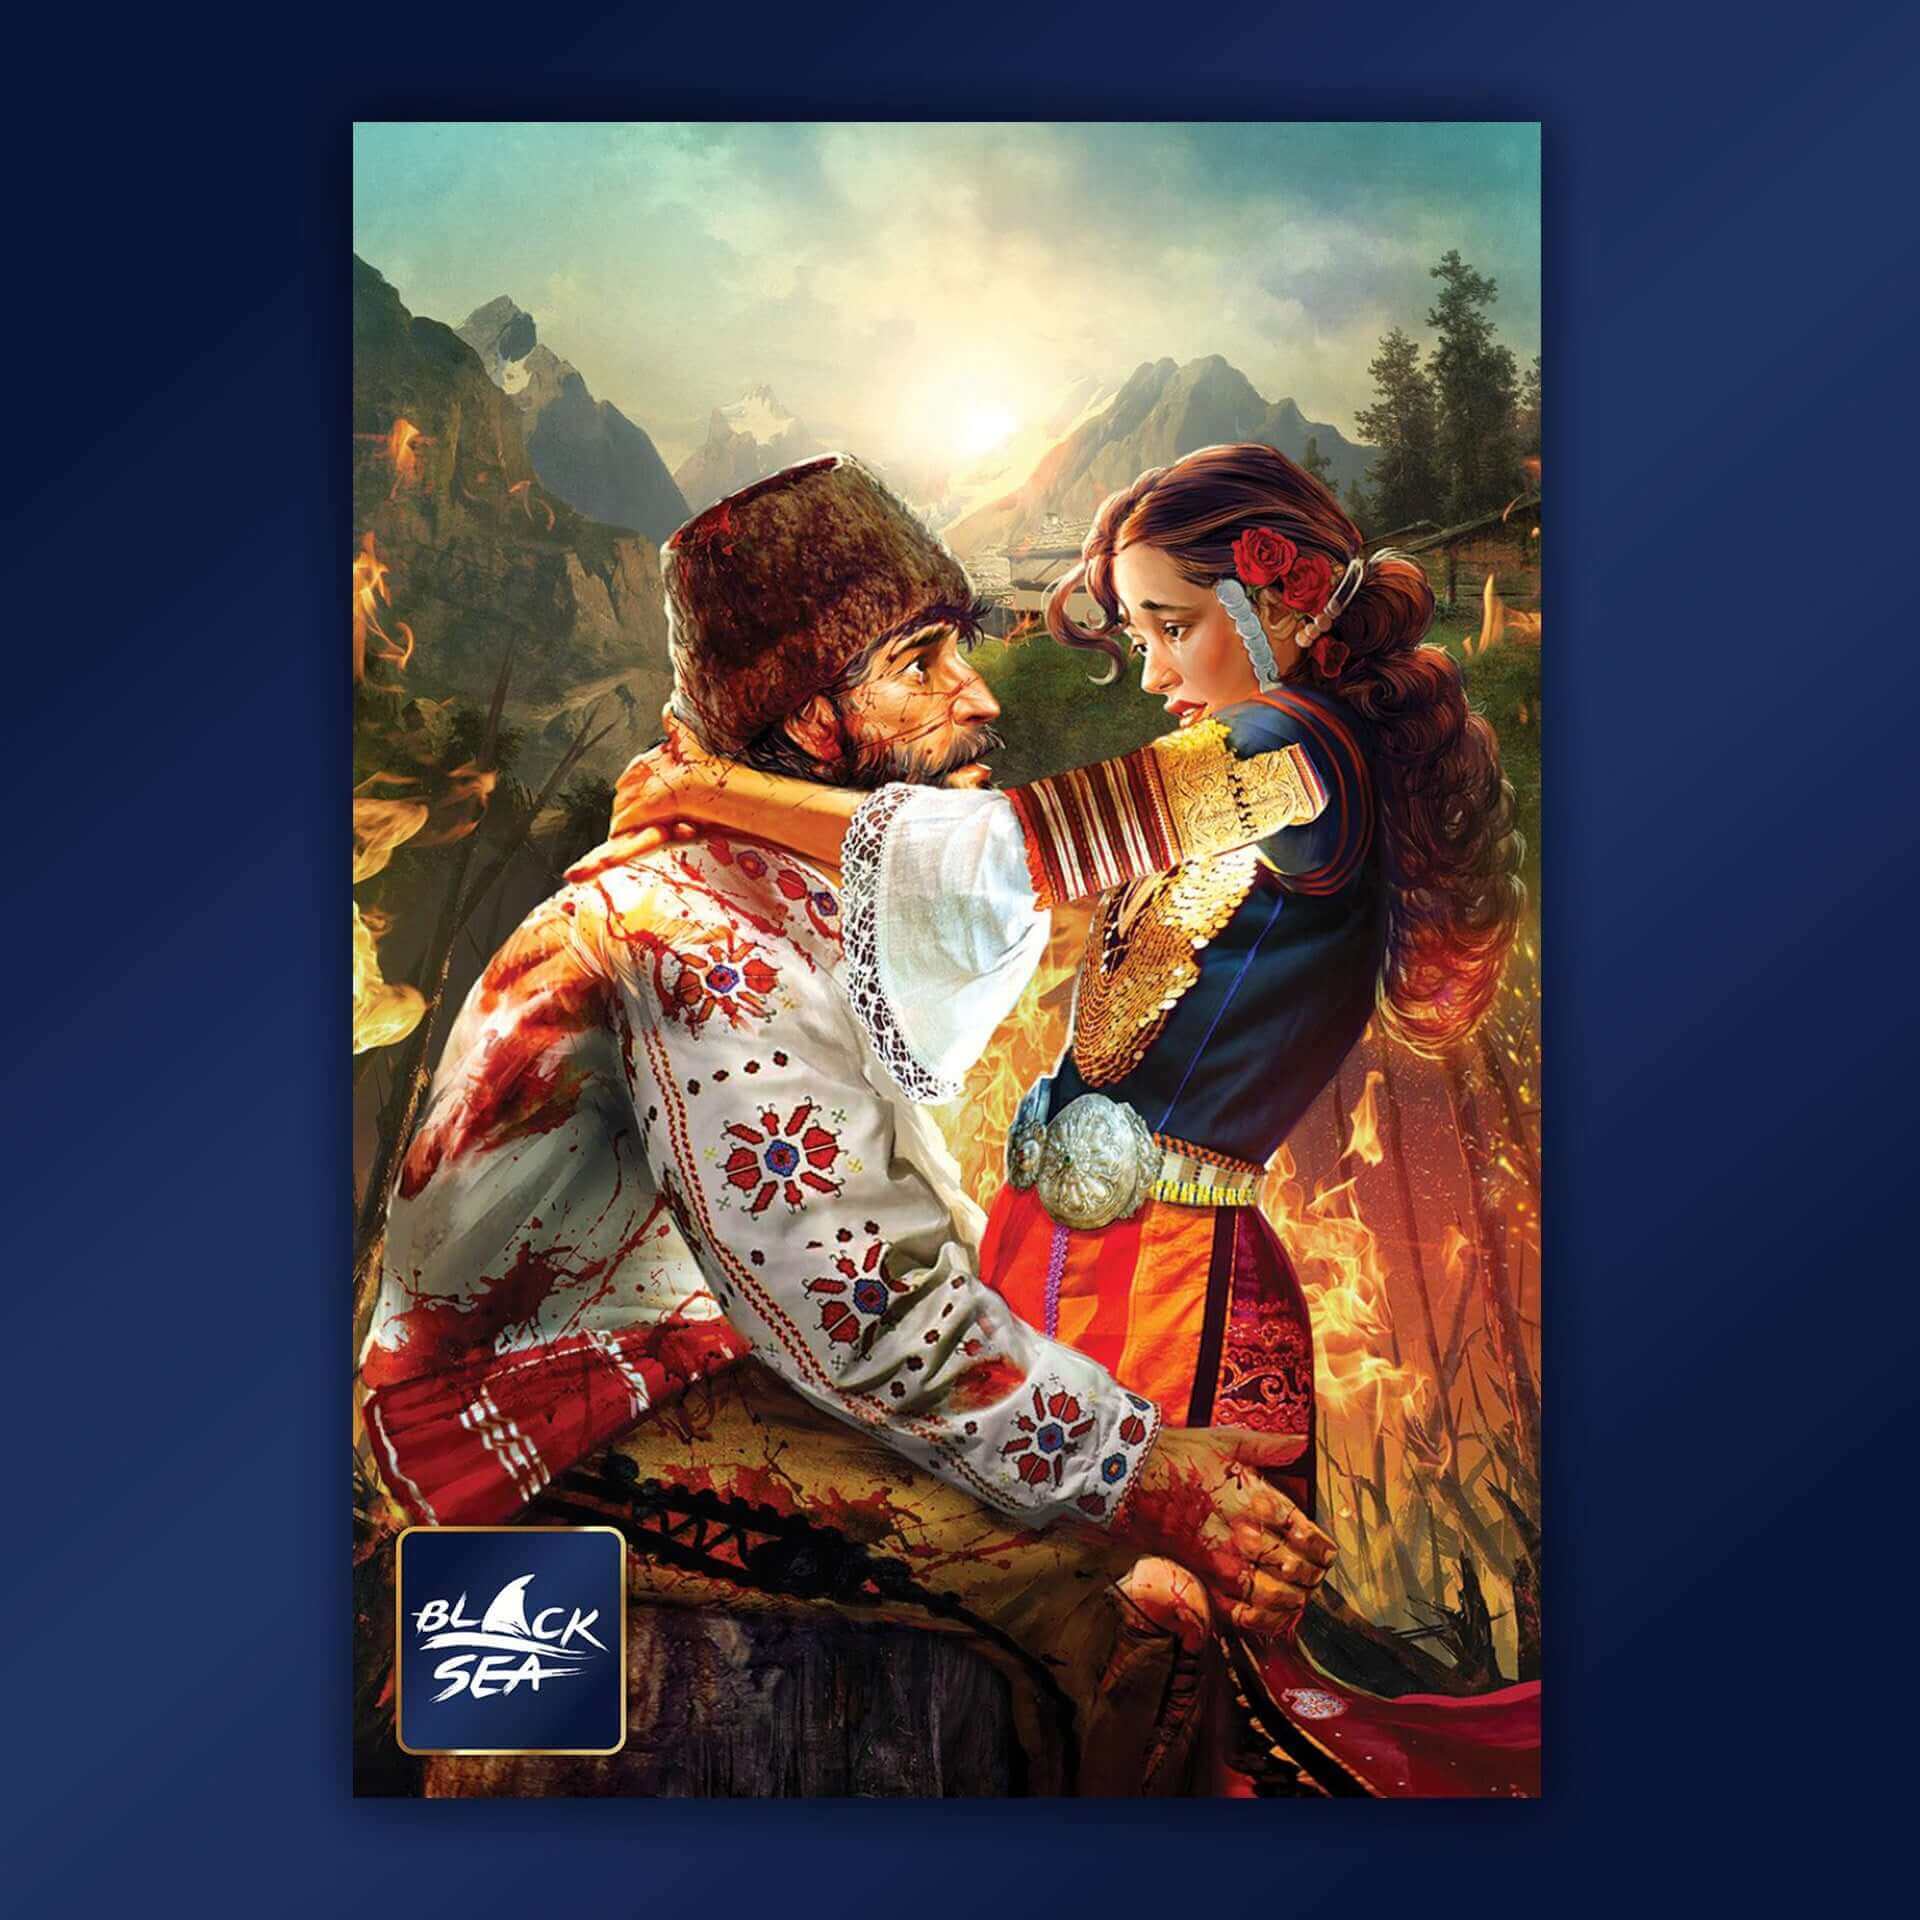 Puzzle Black Sea Premium 1000 pieces - Free Forever, Thus ends the centuries-old struggle – in flame, and ash, and ruin. A dream come true, victory is ours now, and all shackles are shed. The earth thirstily soaks up the last droplets of blood, as our des